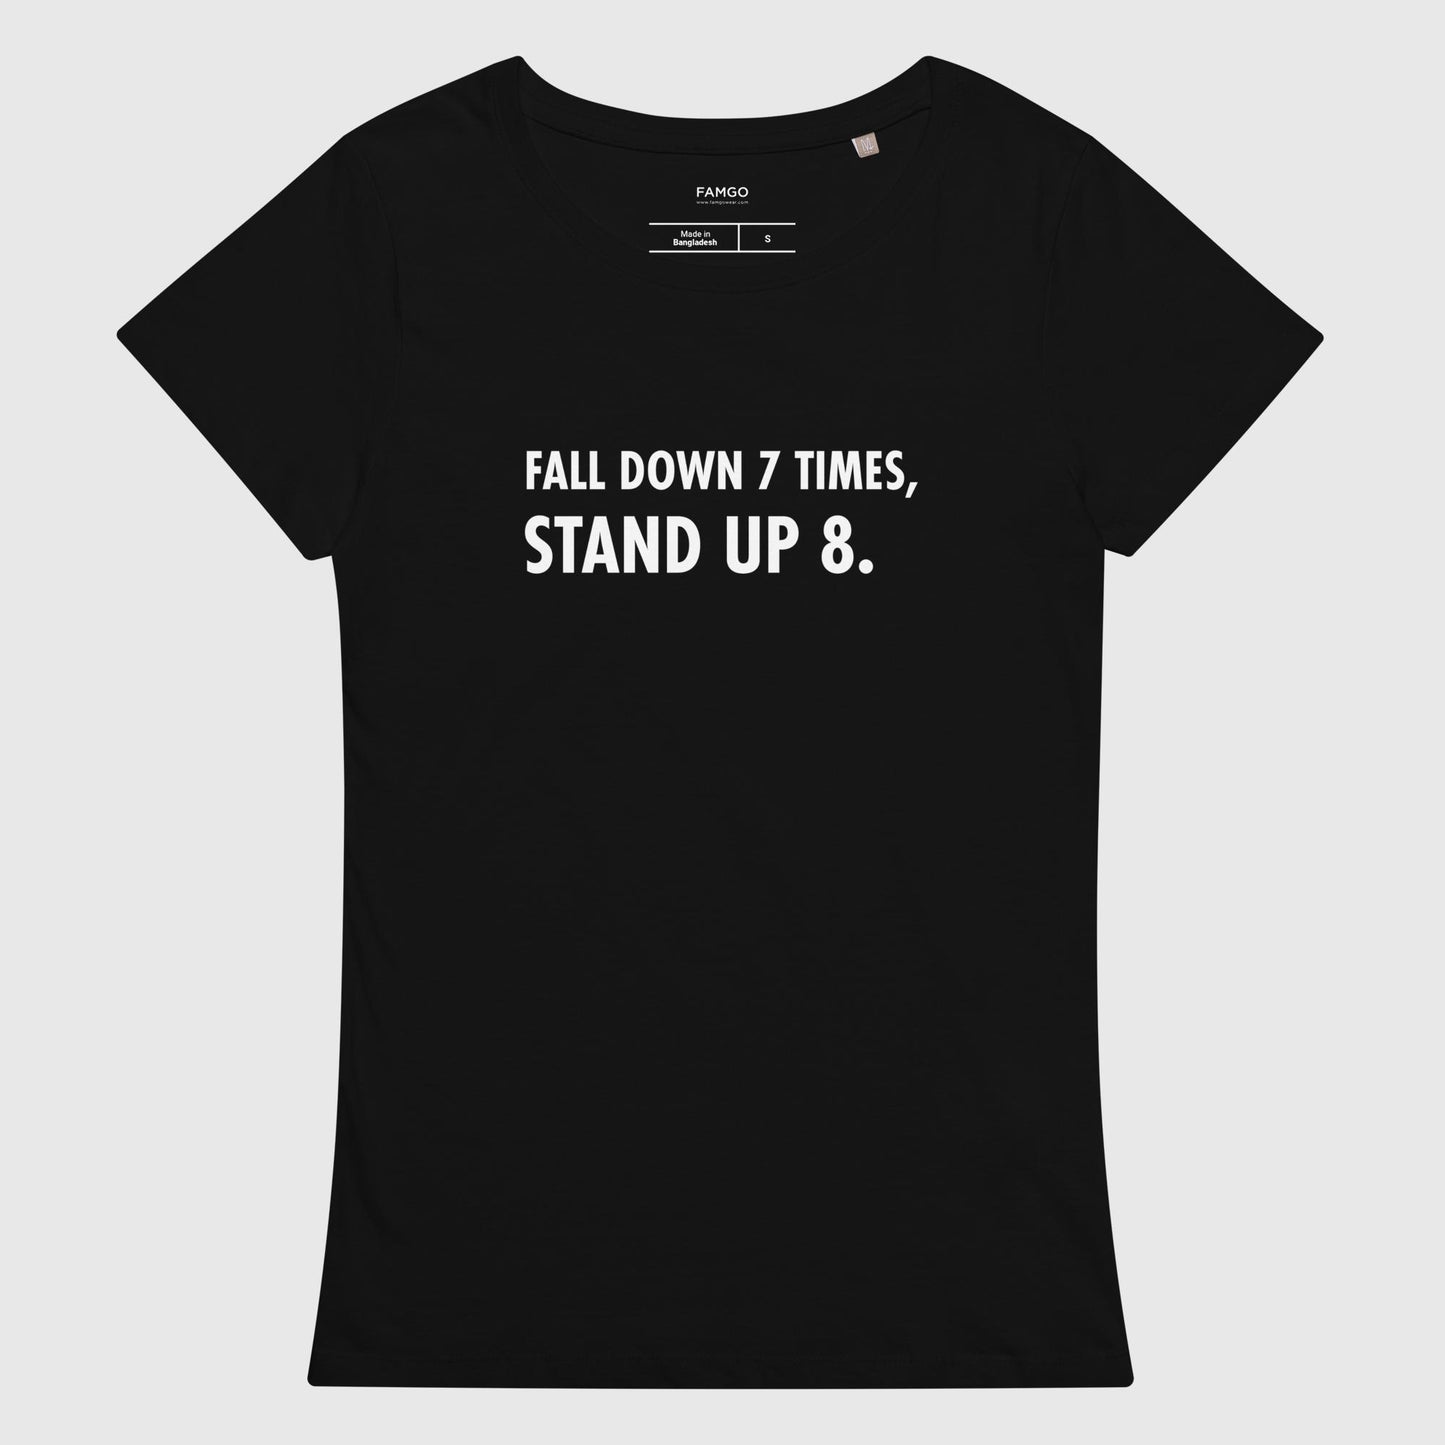 Women's black organic cotton t-shirt that features the Japanese proverb, "Fall Down 7 Times, Stand Up 8."